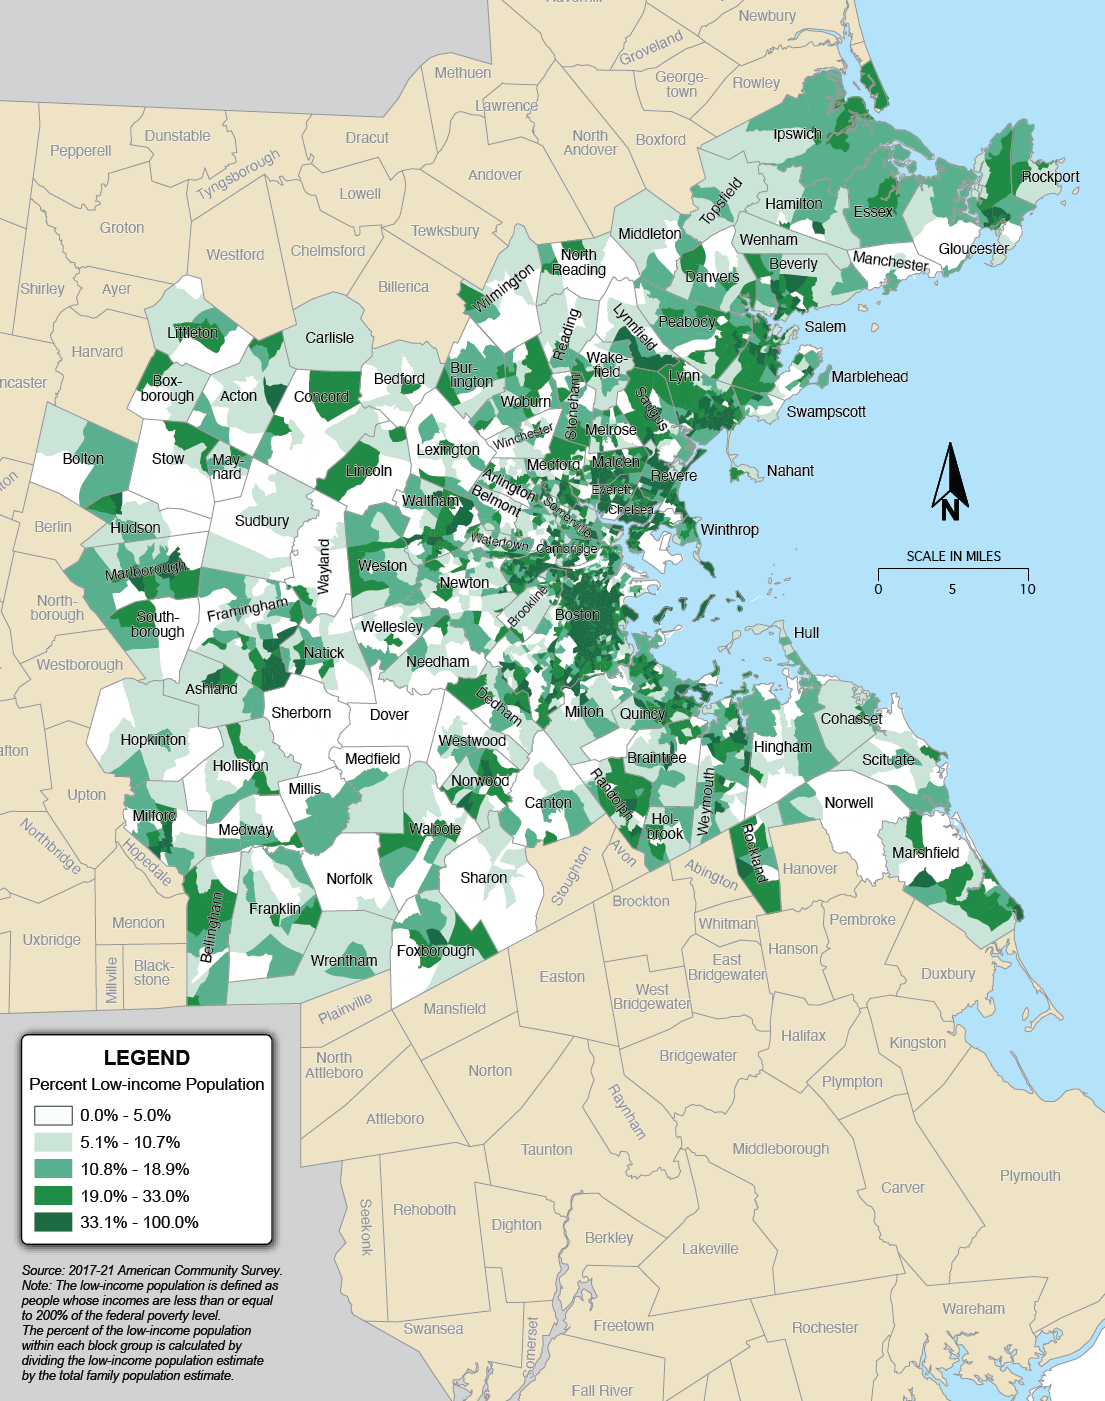 A map showing the percentage of low-income population in the Boston Region.